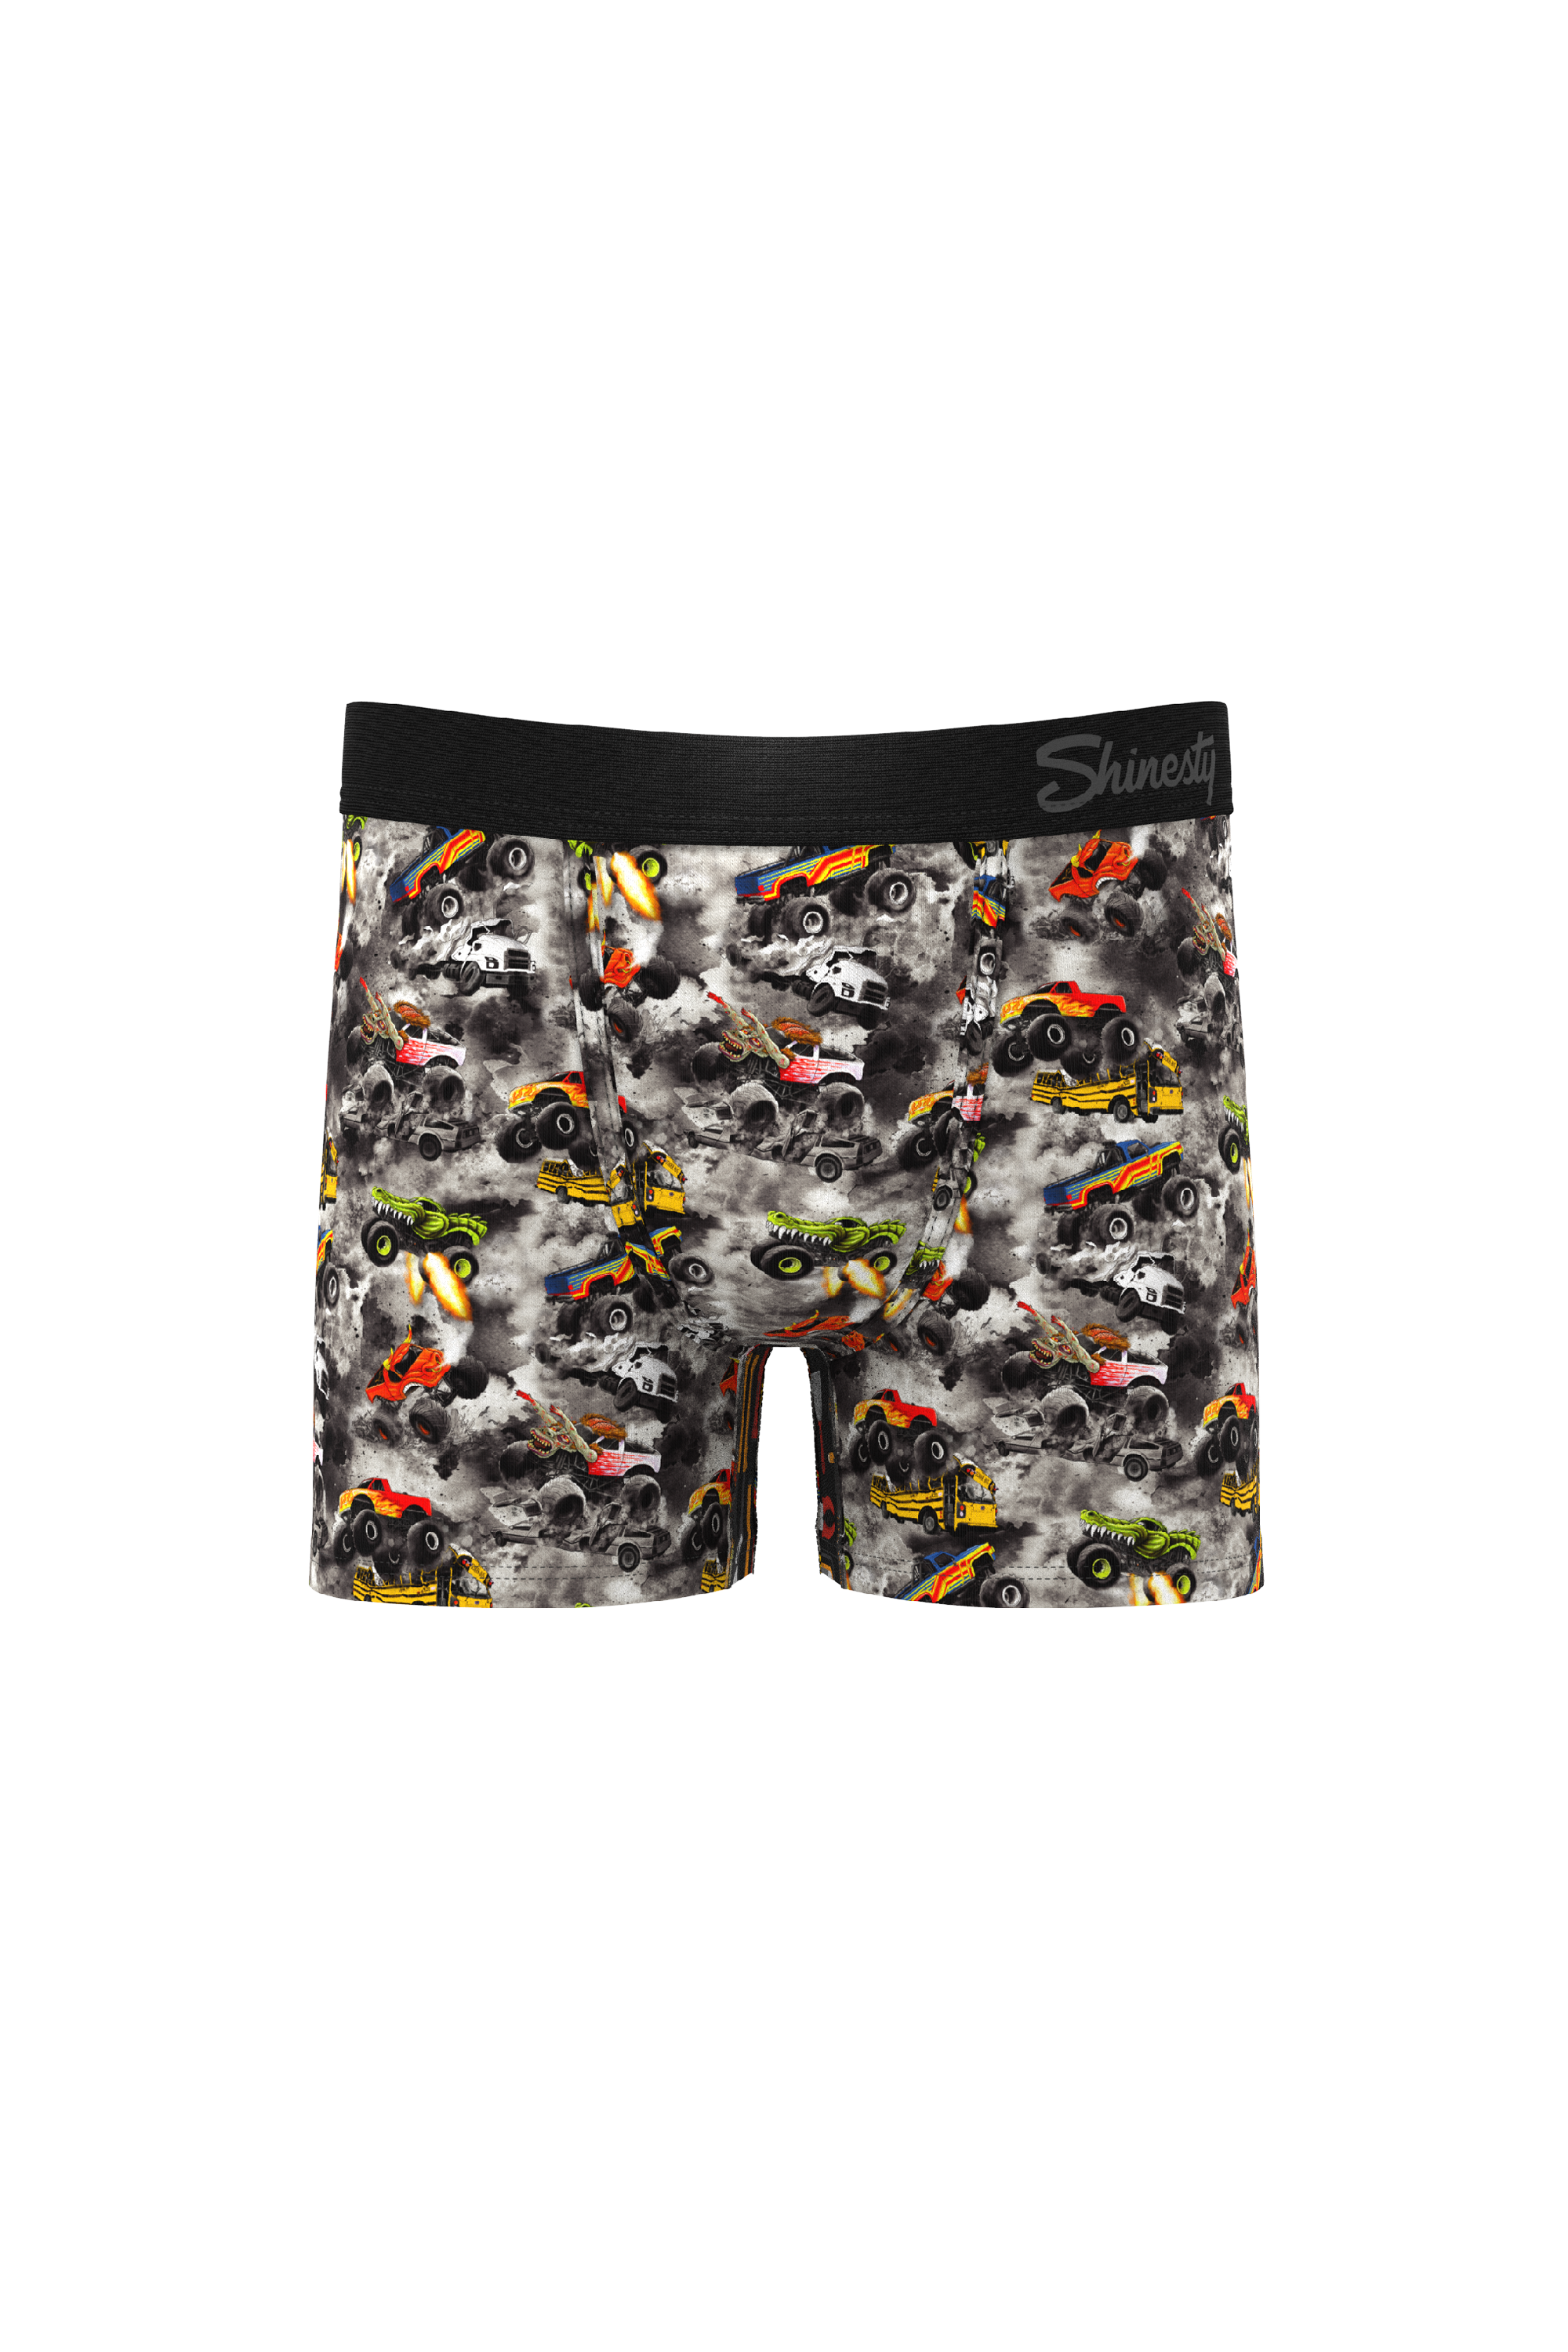 The Here Be Monsters | Monster Truck Boys Boxers